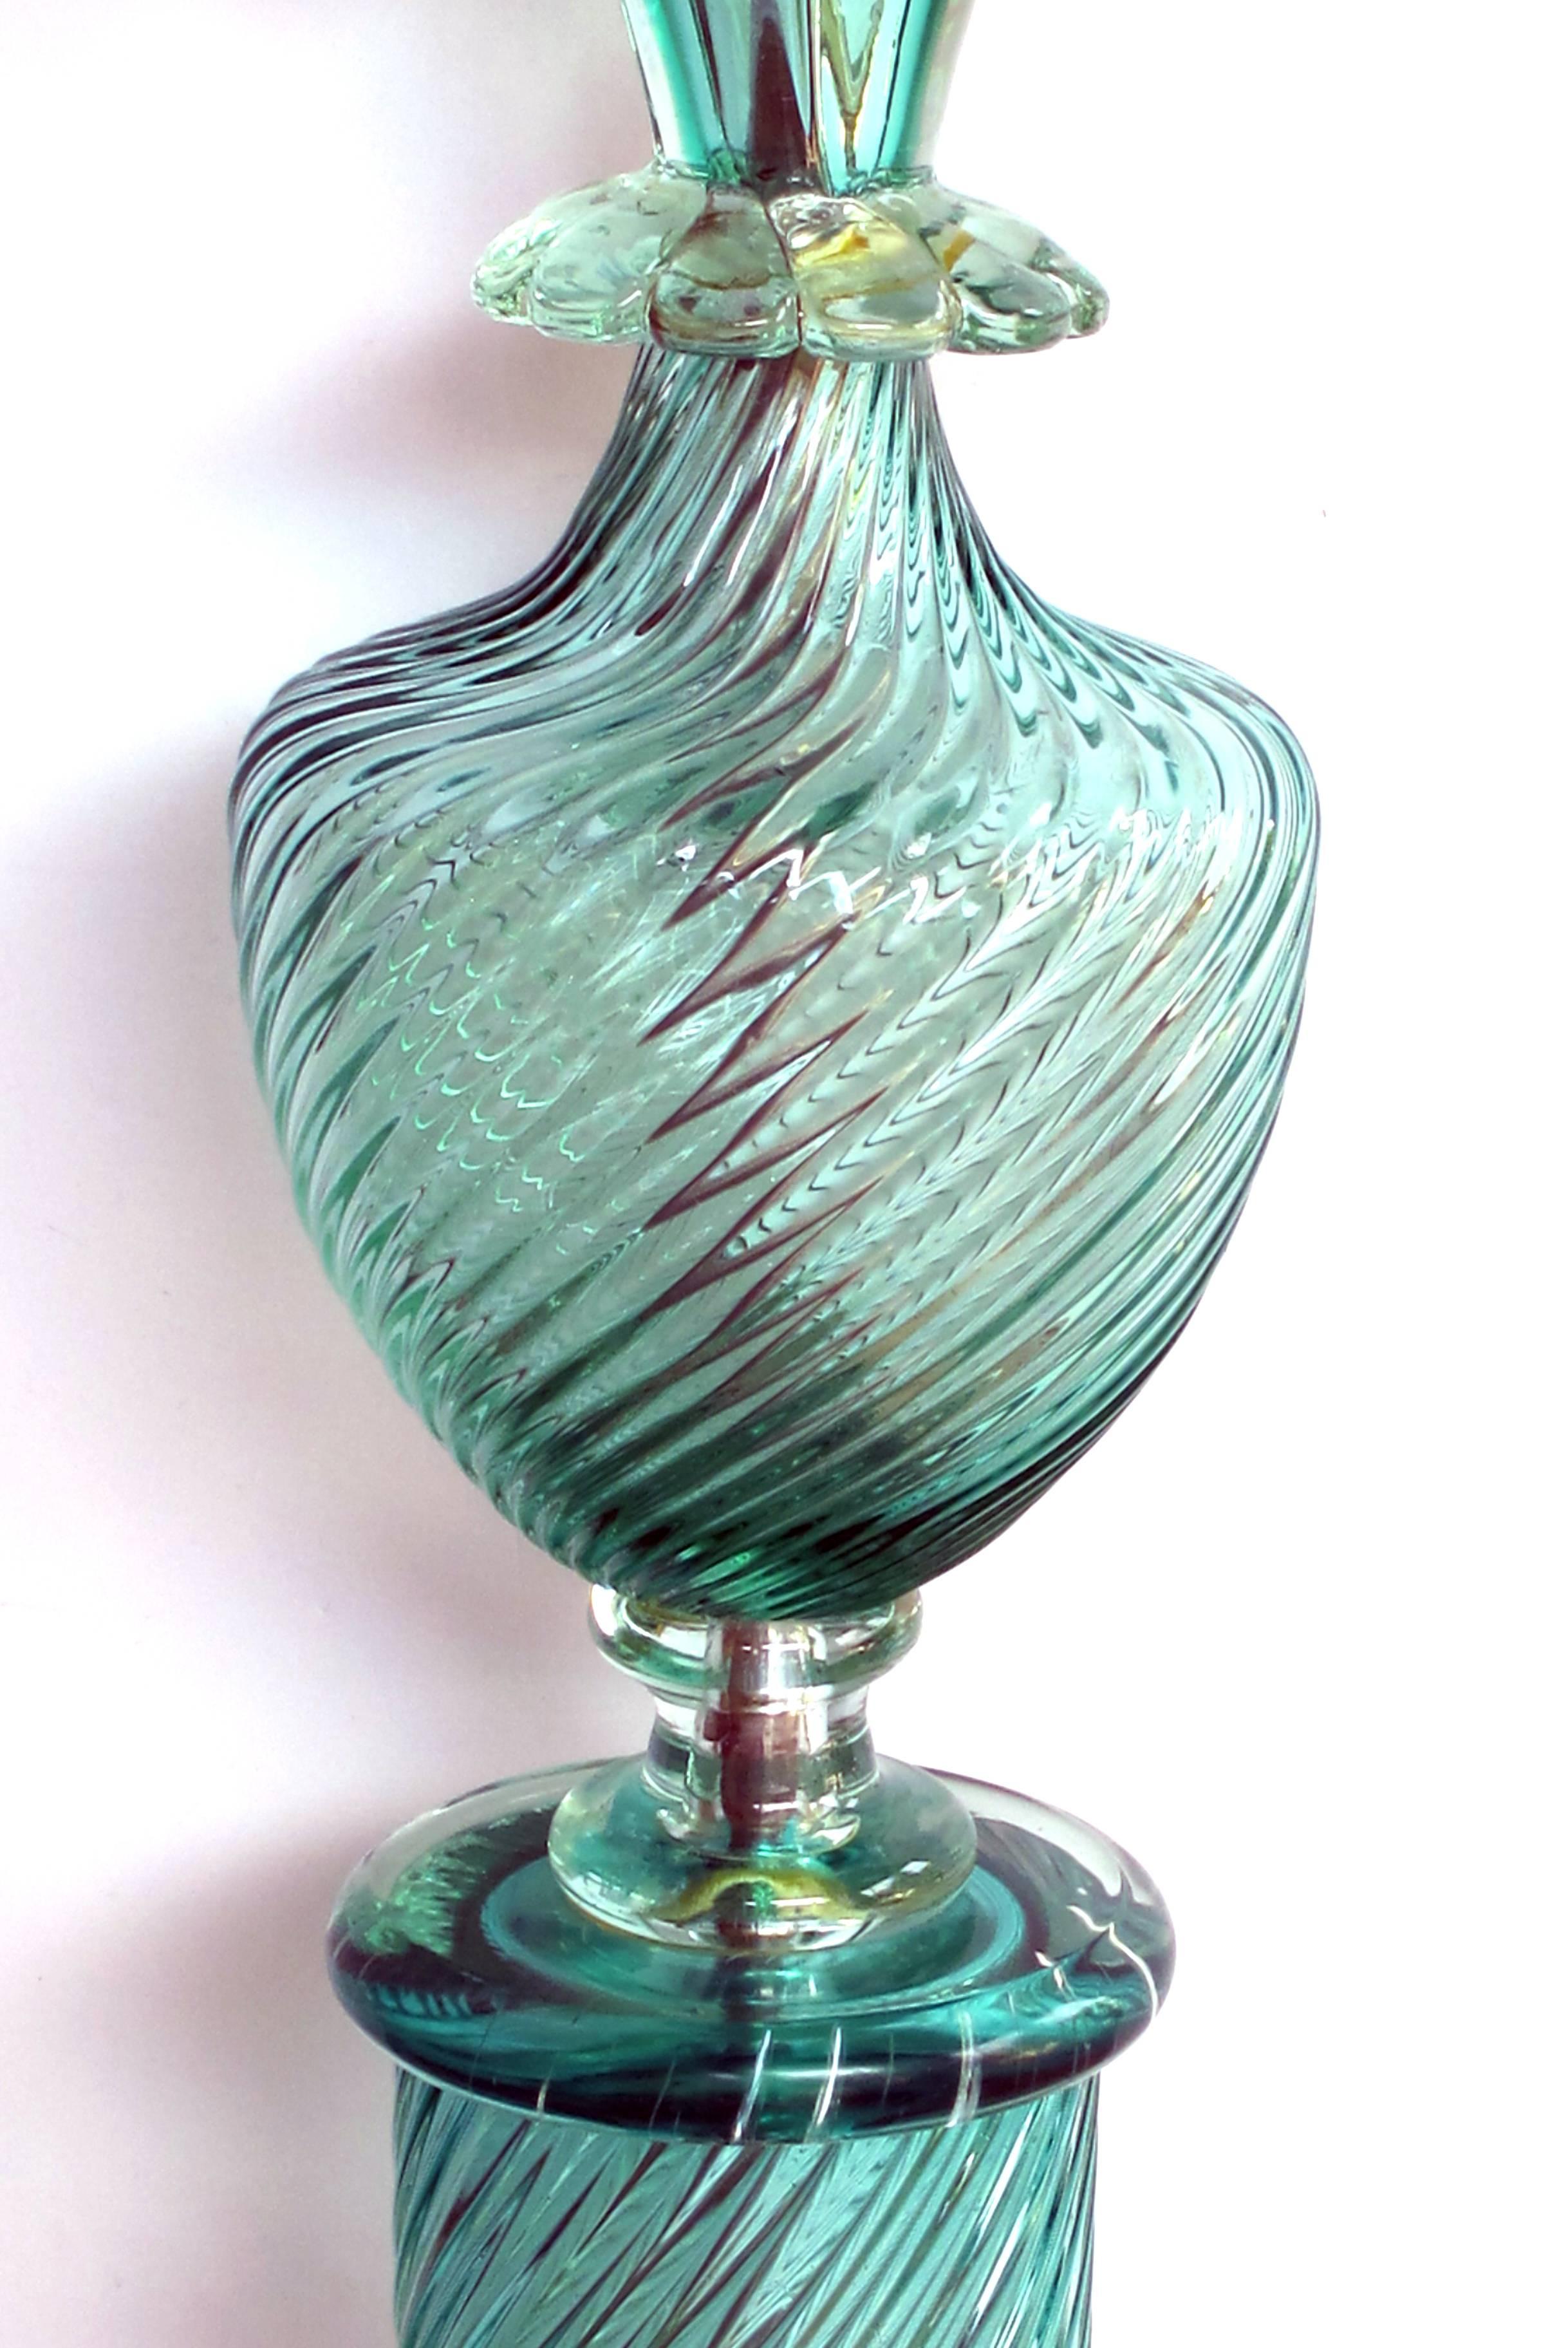 Italian Stunning Pair of Murano 1960s Baluster-Form Aqua Glass Lamps by Marbro Lamp Co